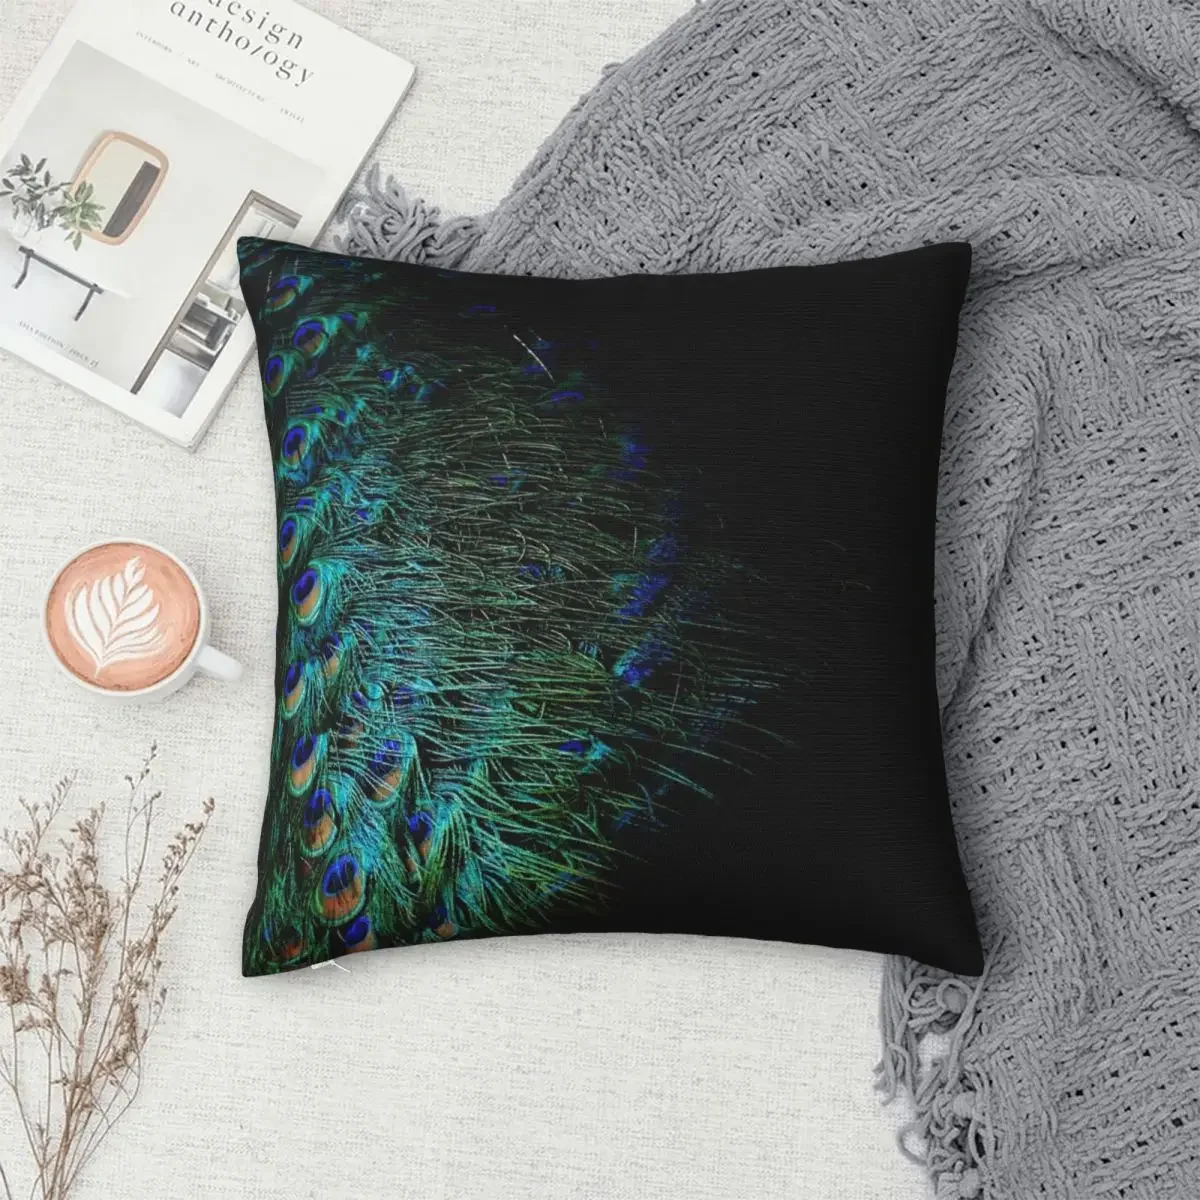 

Peacock Feathers On A Black Background Pillowcase Polyester Pillows Cover Cushion Comfort Throw Pillow Sofa Decorative Cushions